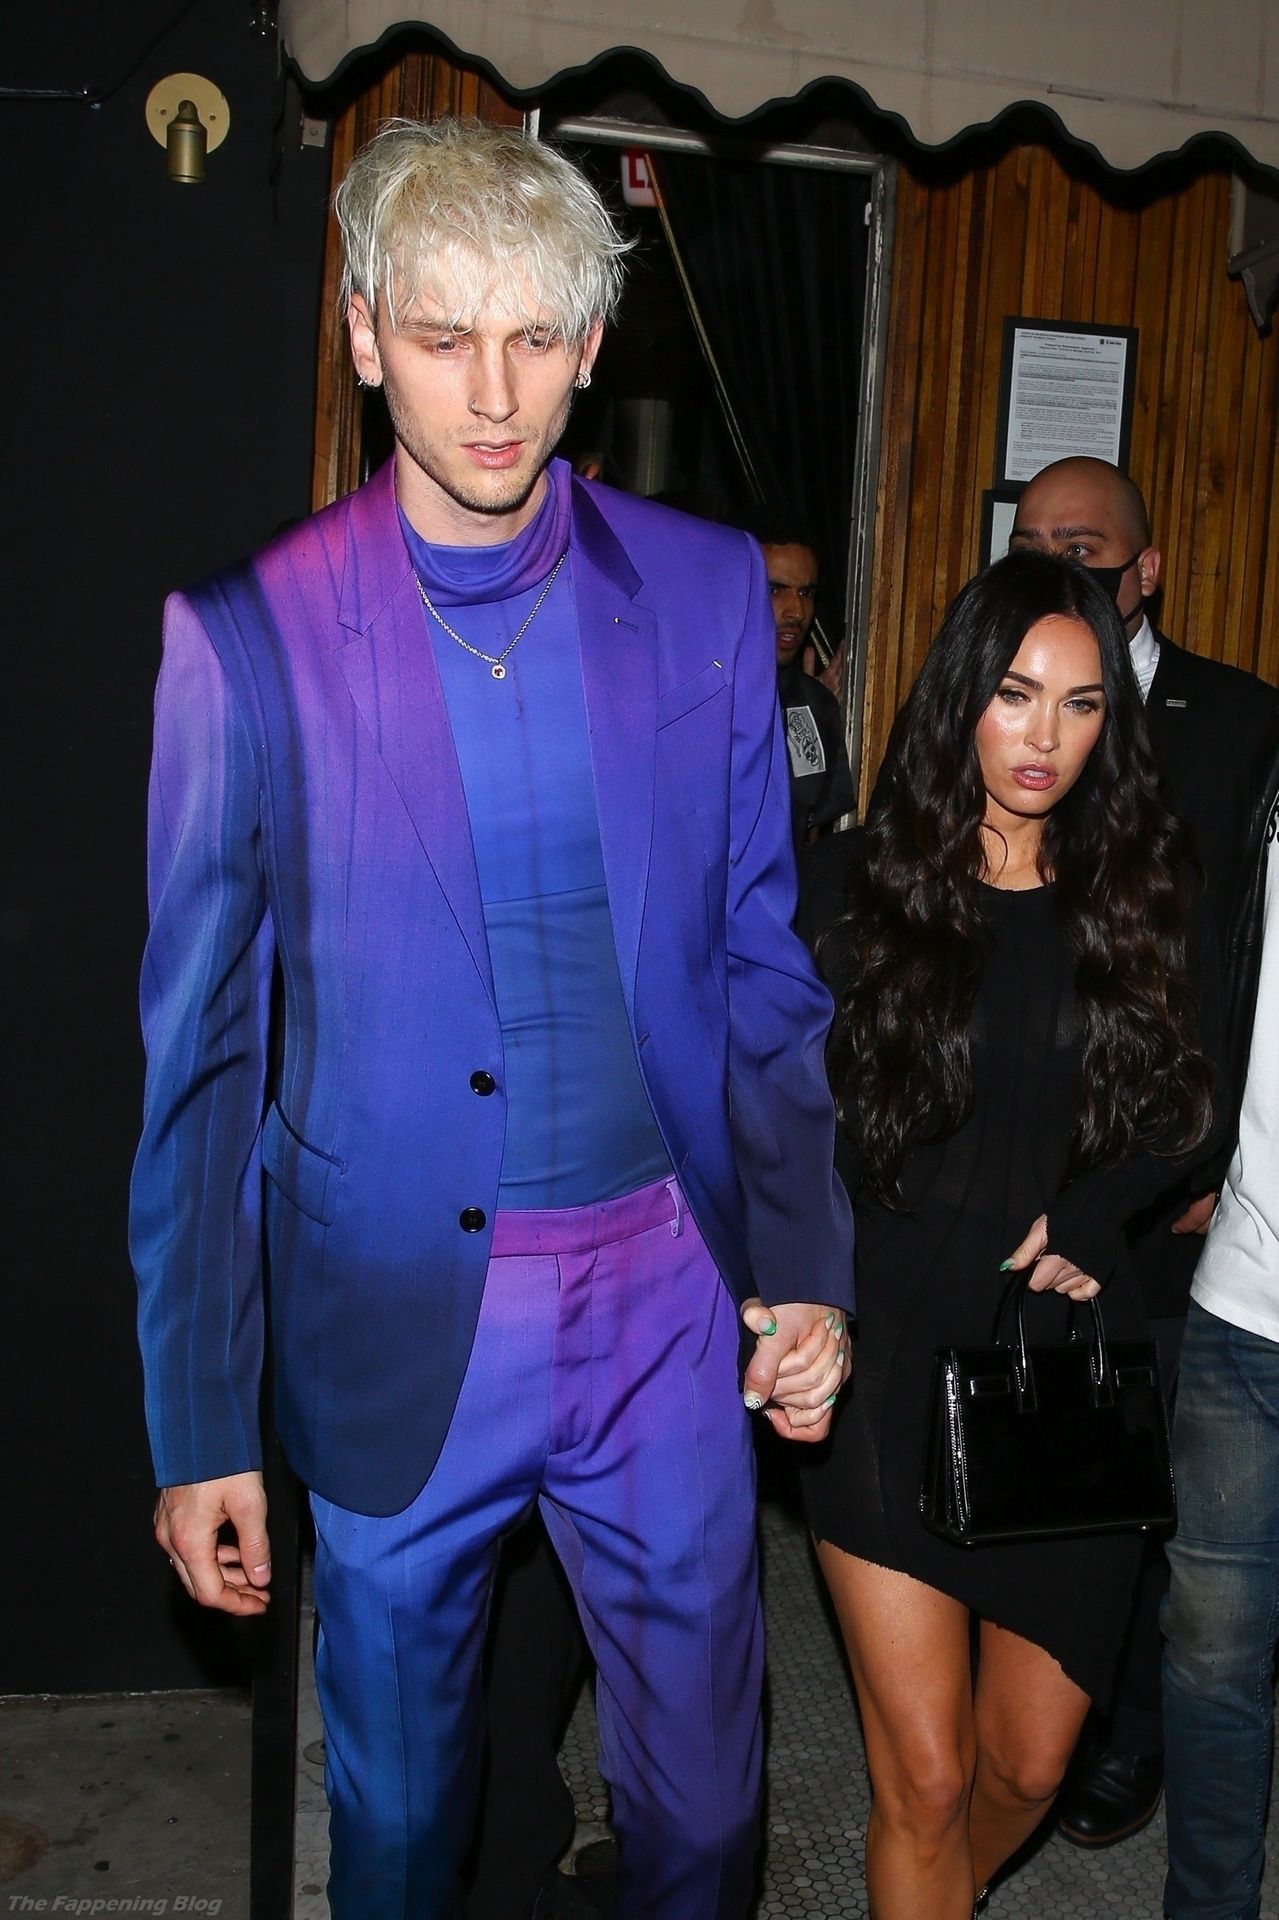 Megan Fox & MGK are Seen Leaving an Event at The Nice Guy (70 Photos)